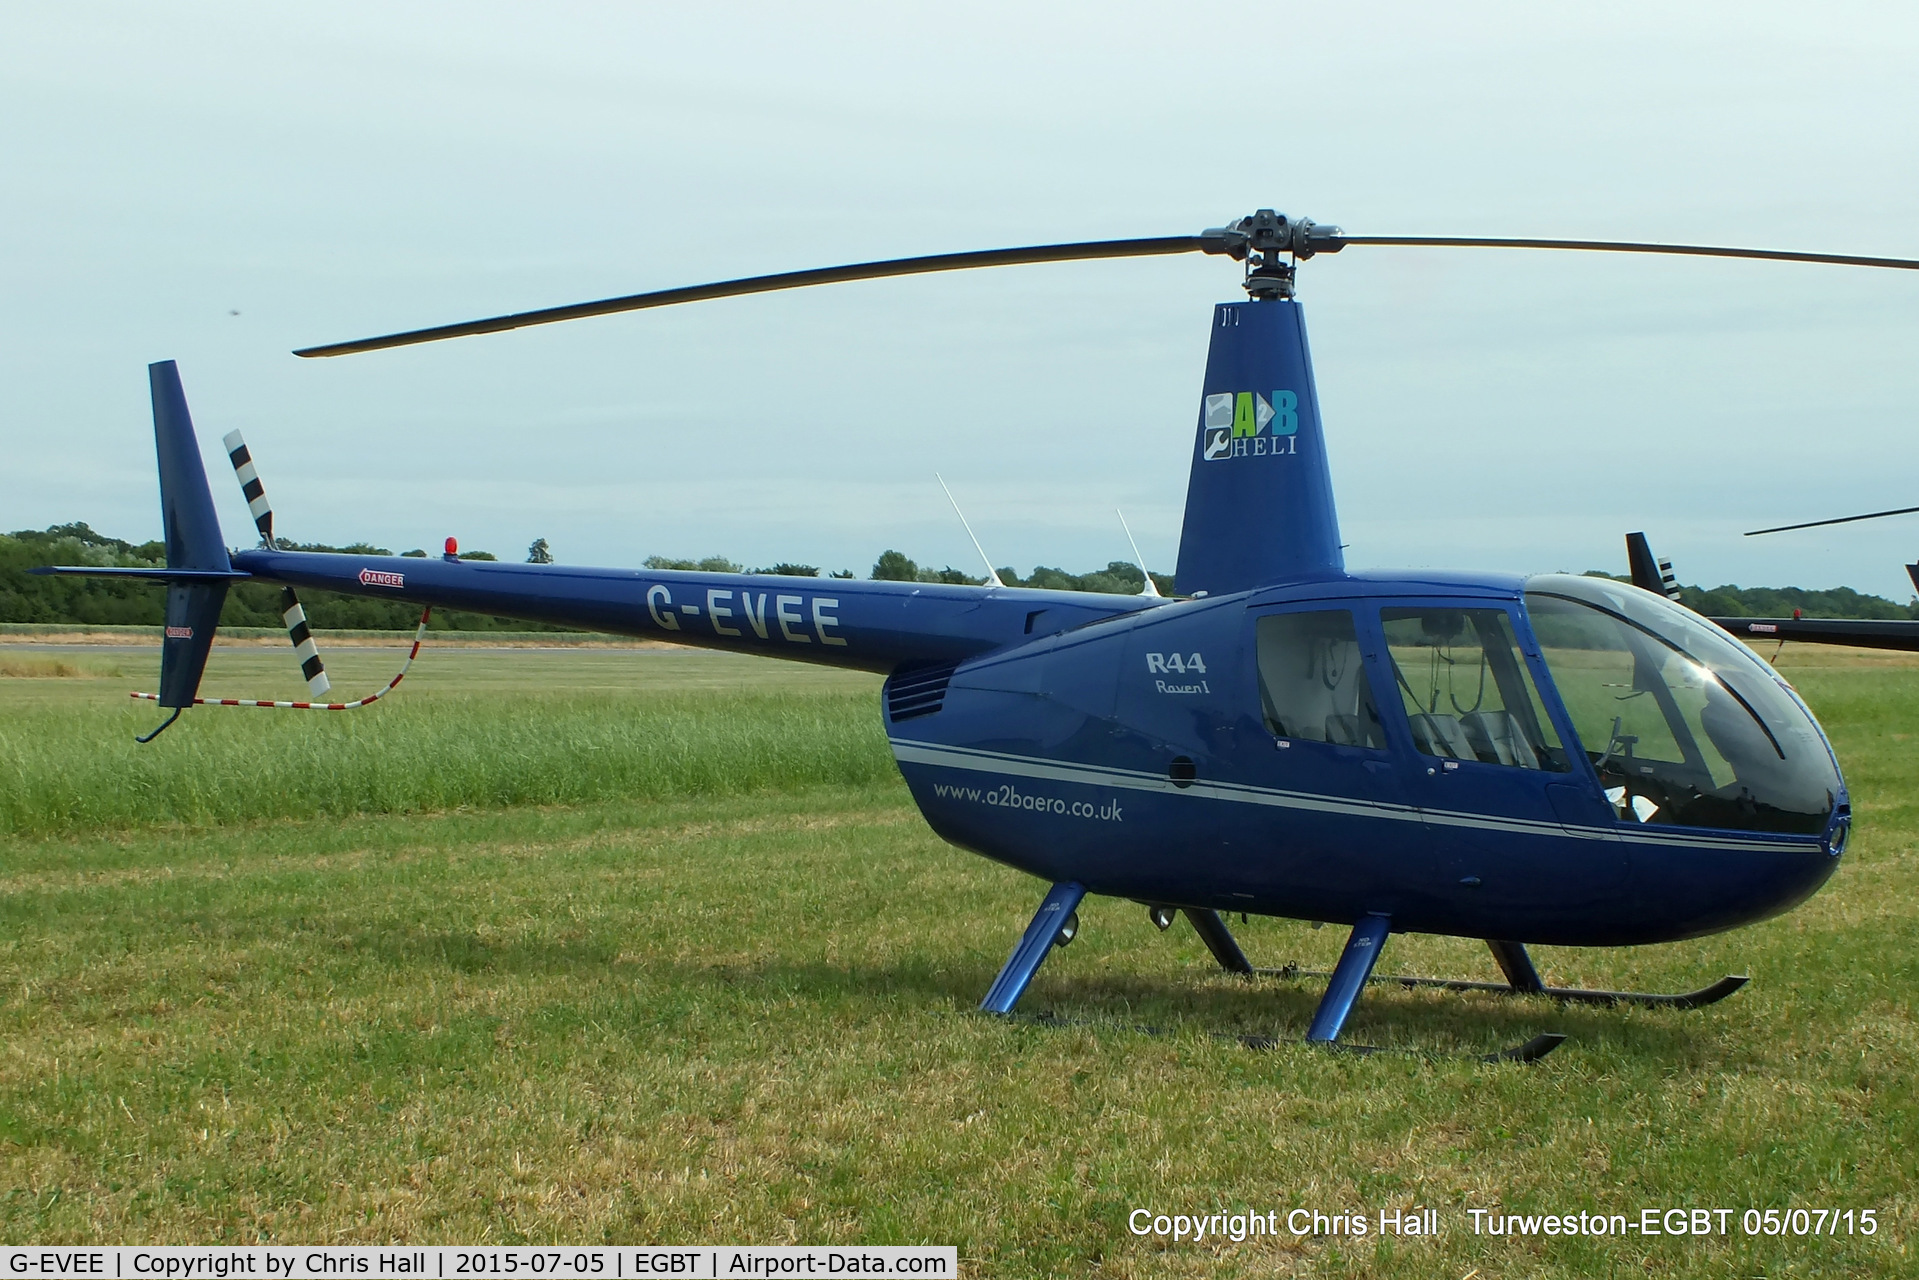 G-EVEE, 2005 Robinson R44 Raven C/N 1517, ferrying race fans to the British F1 Grand Prix at Silverstone